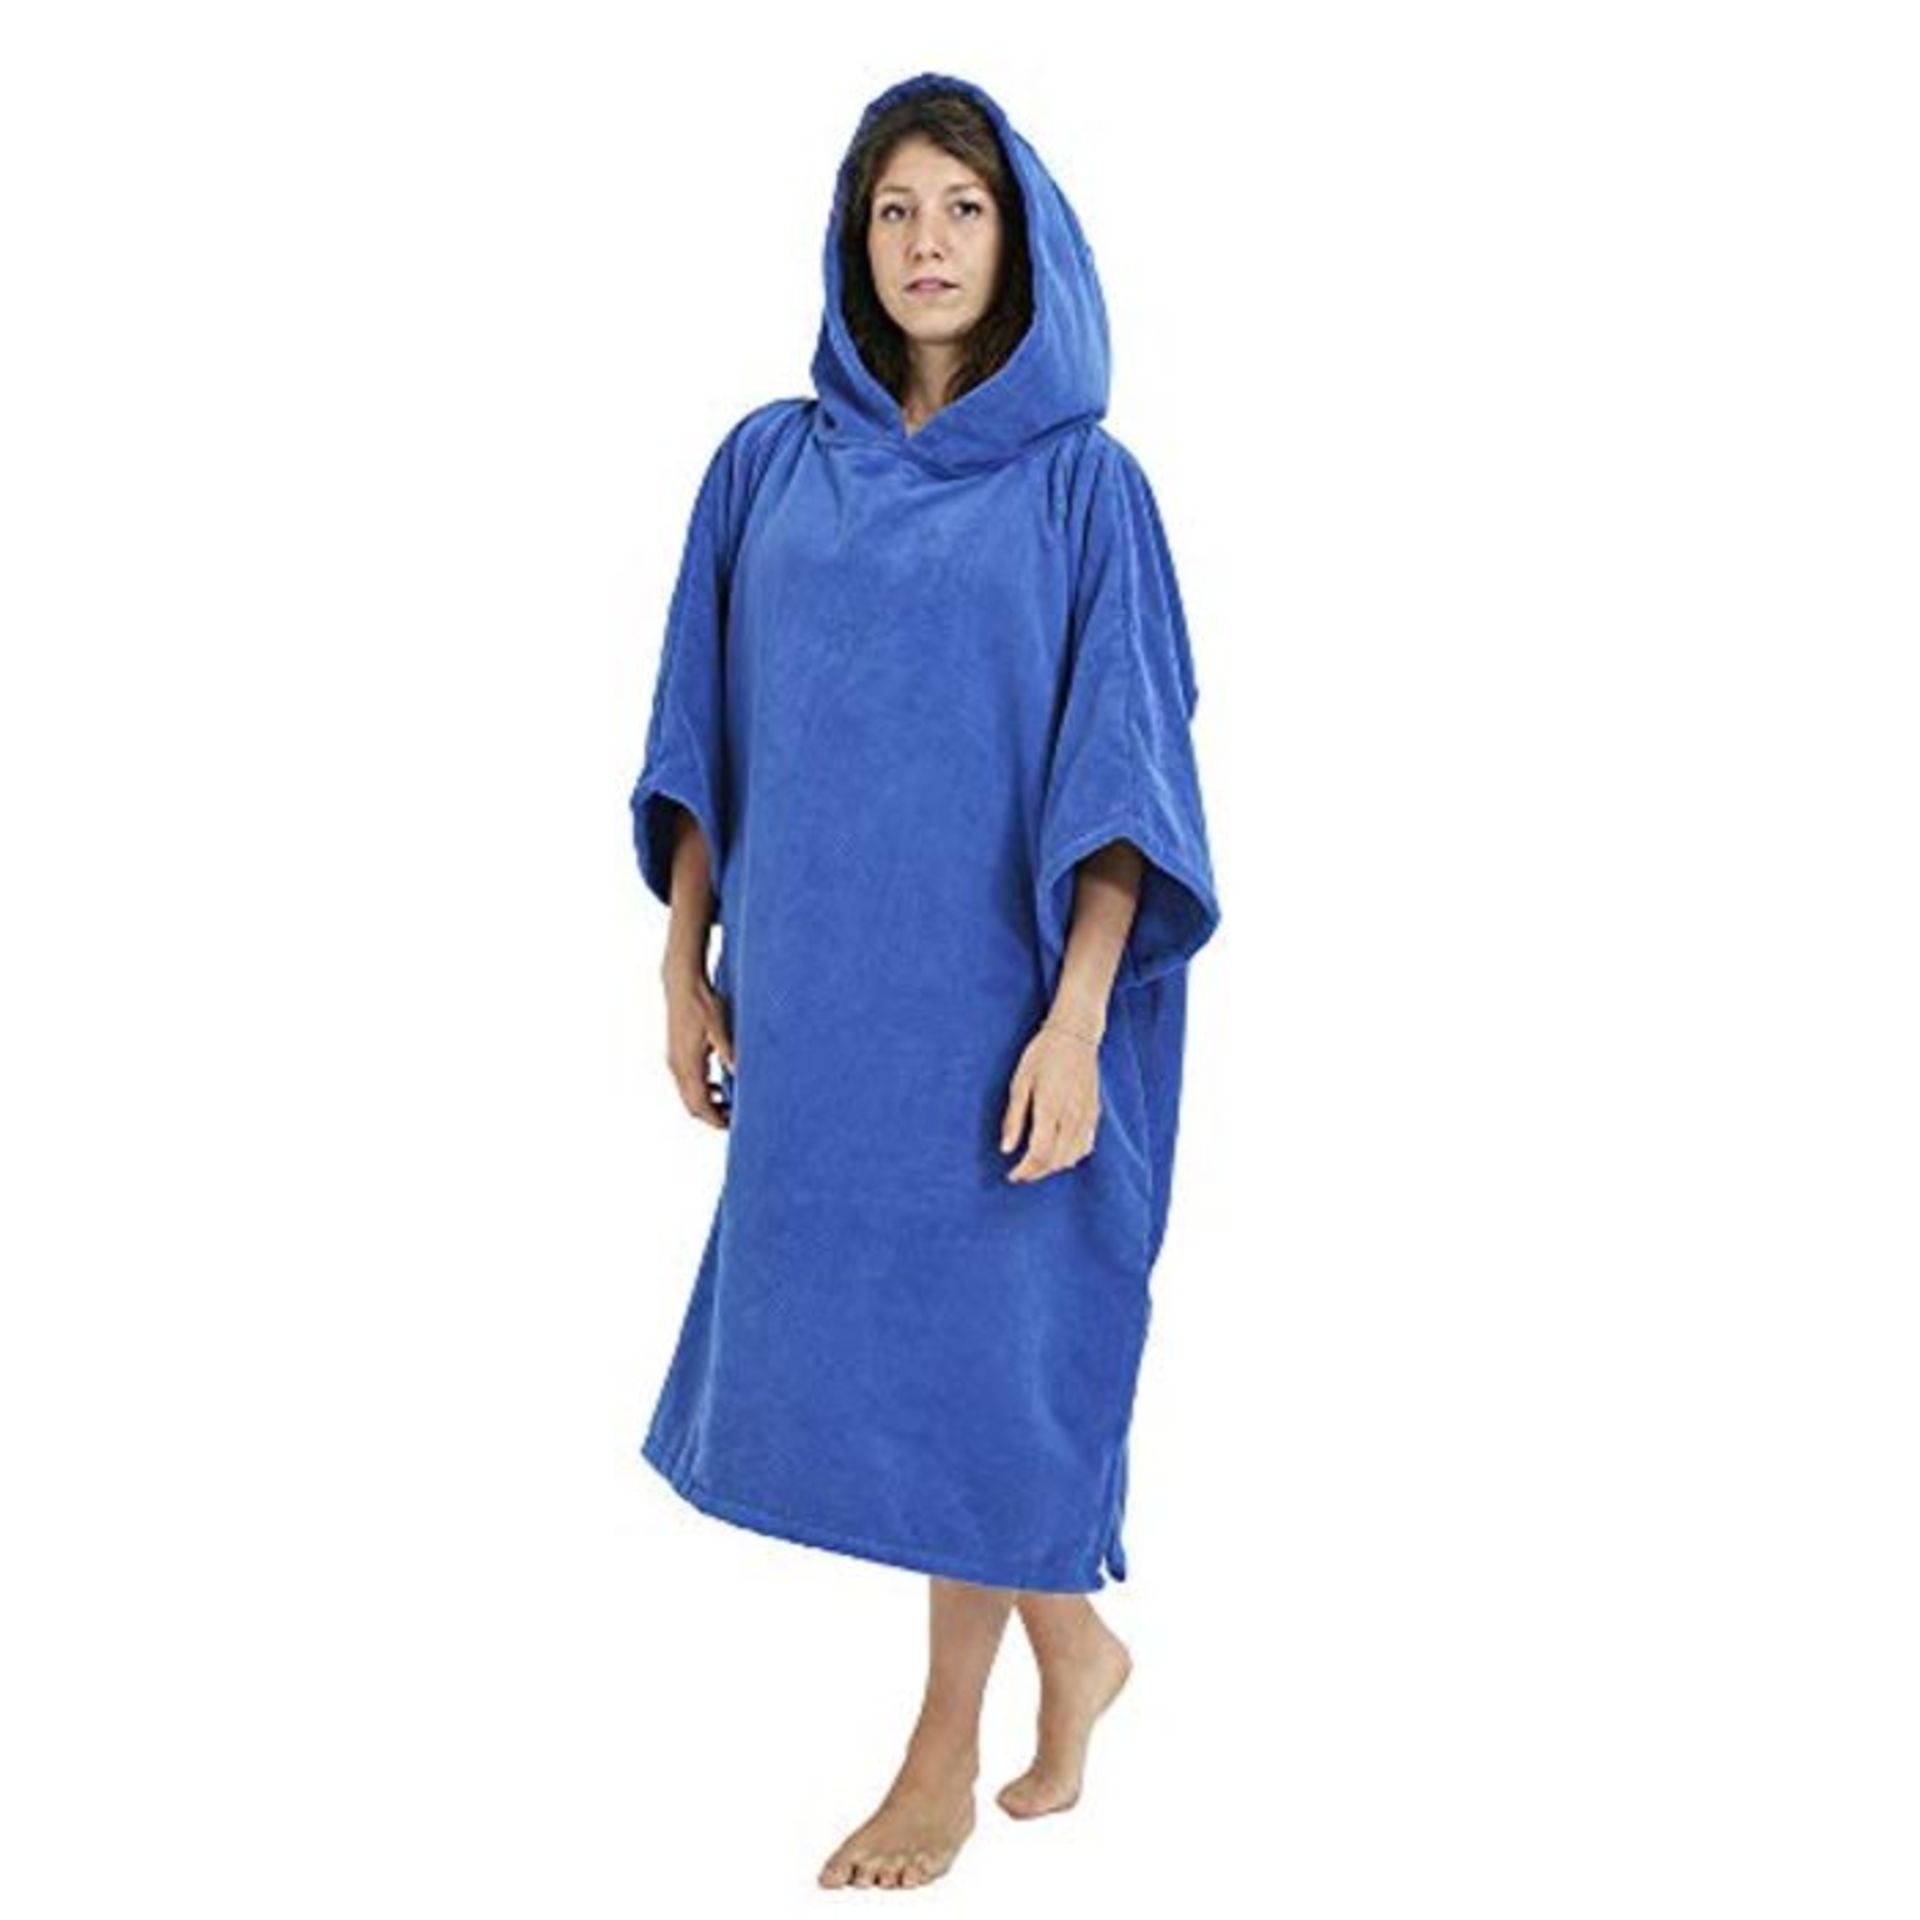 Winthome Sleeveless Changing Bath Robe with Pocket, Surf Poncho Towel (Blue)